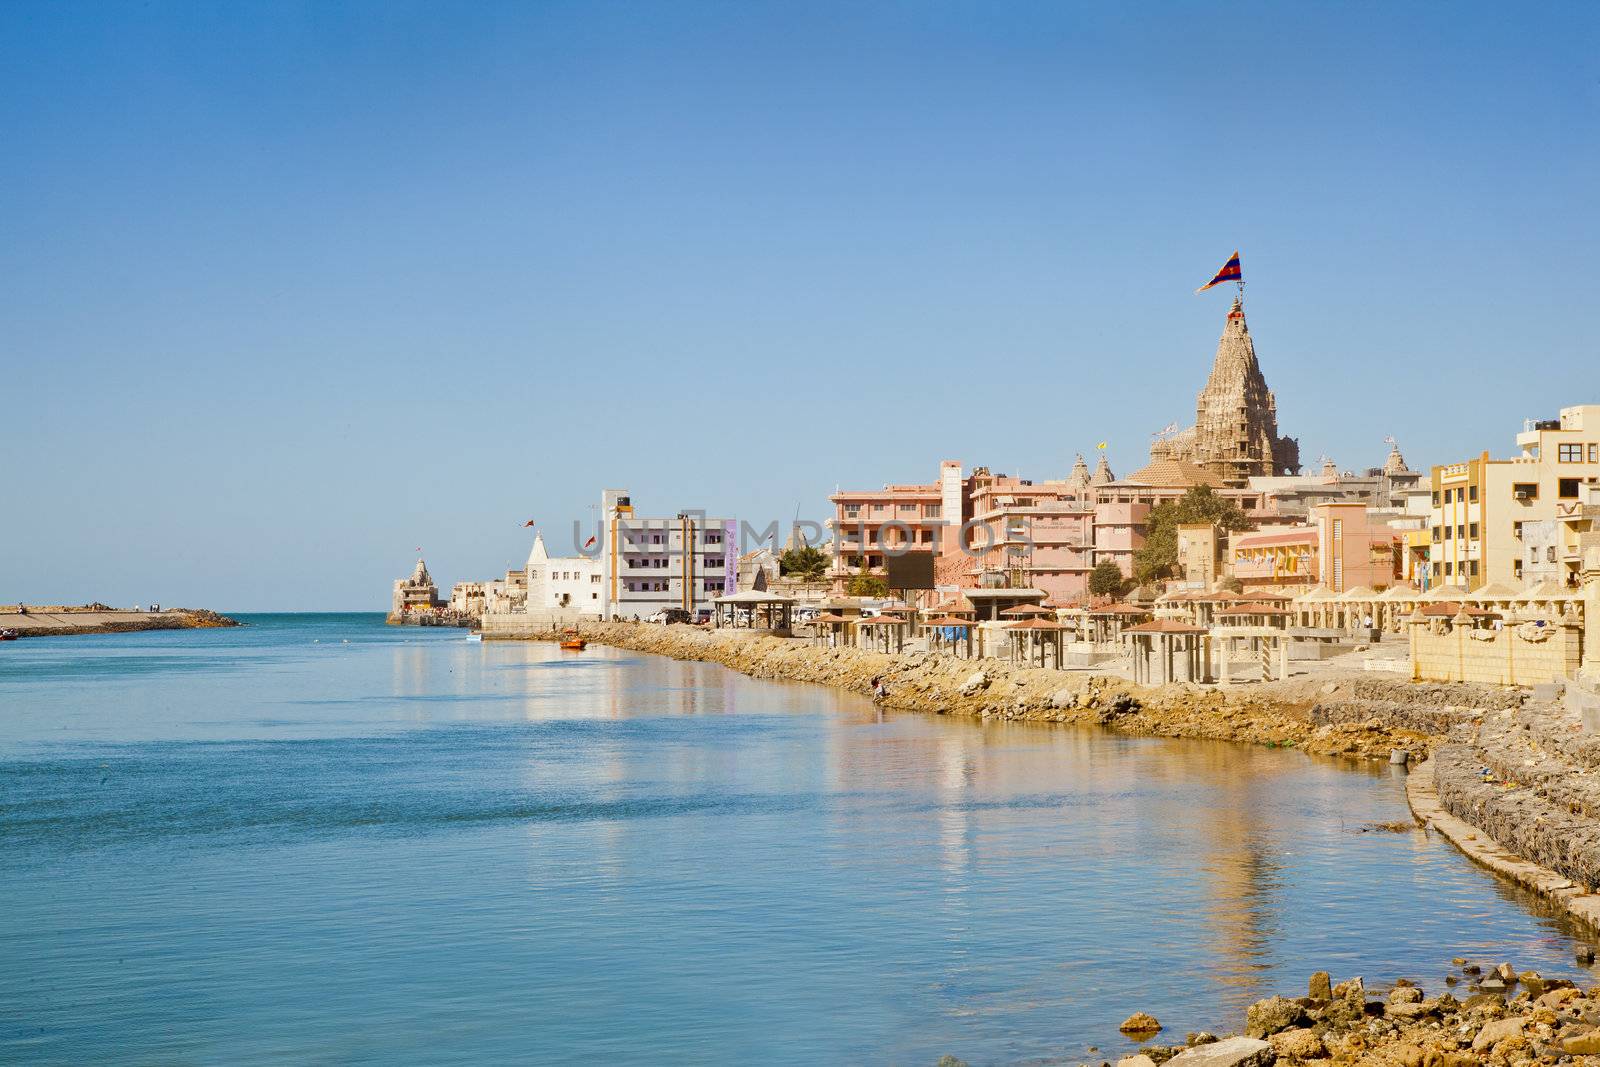 Dwarka Roadtrip. Landscape of Dwarka Bay, Arabian Sea and promenade from the public pathway leading upto the Shree Dwarakadheesh Krishna Temple a significant religious place and pilgrimage for hindus on the coast of Gujarat, India